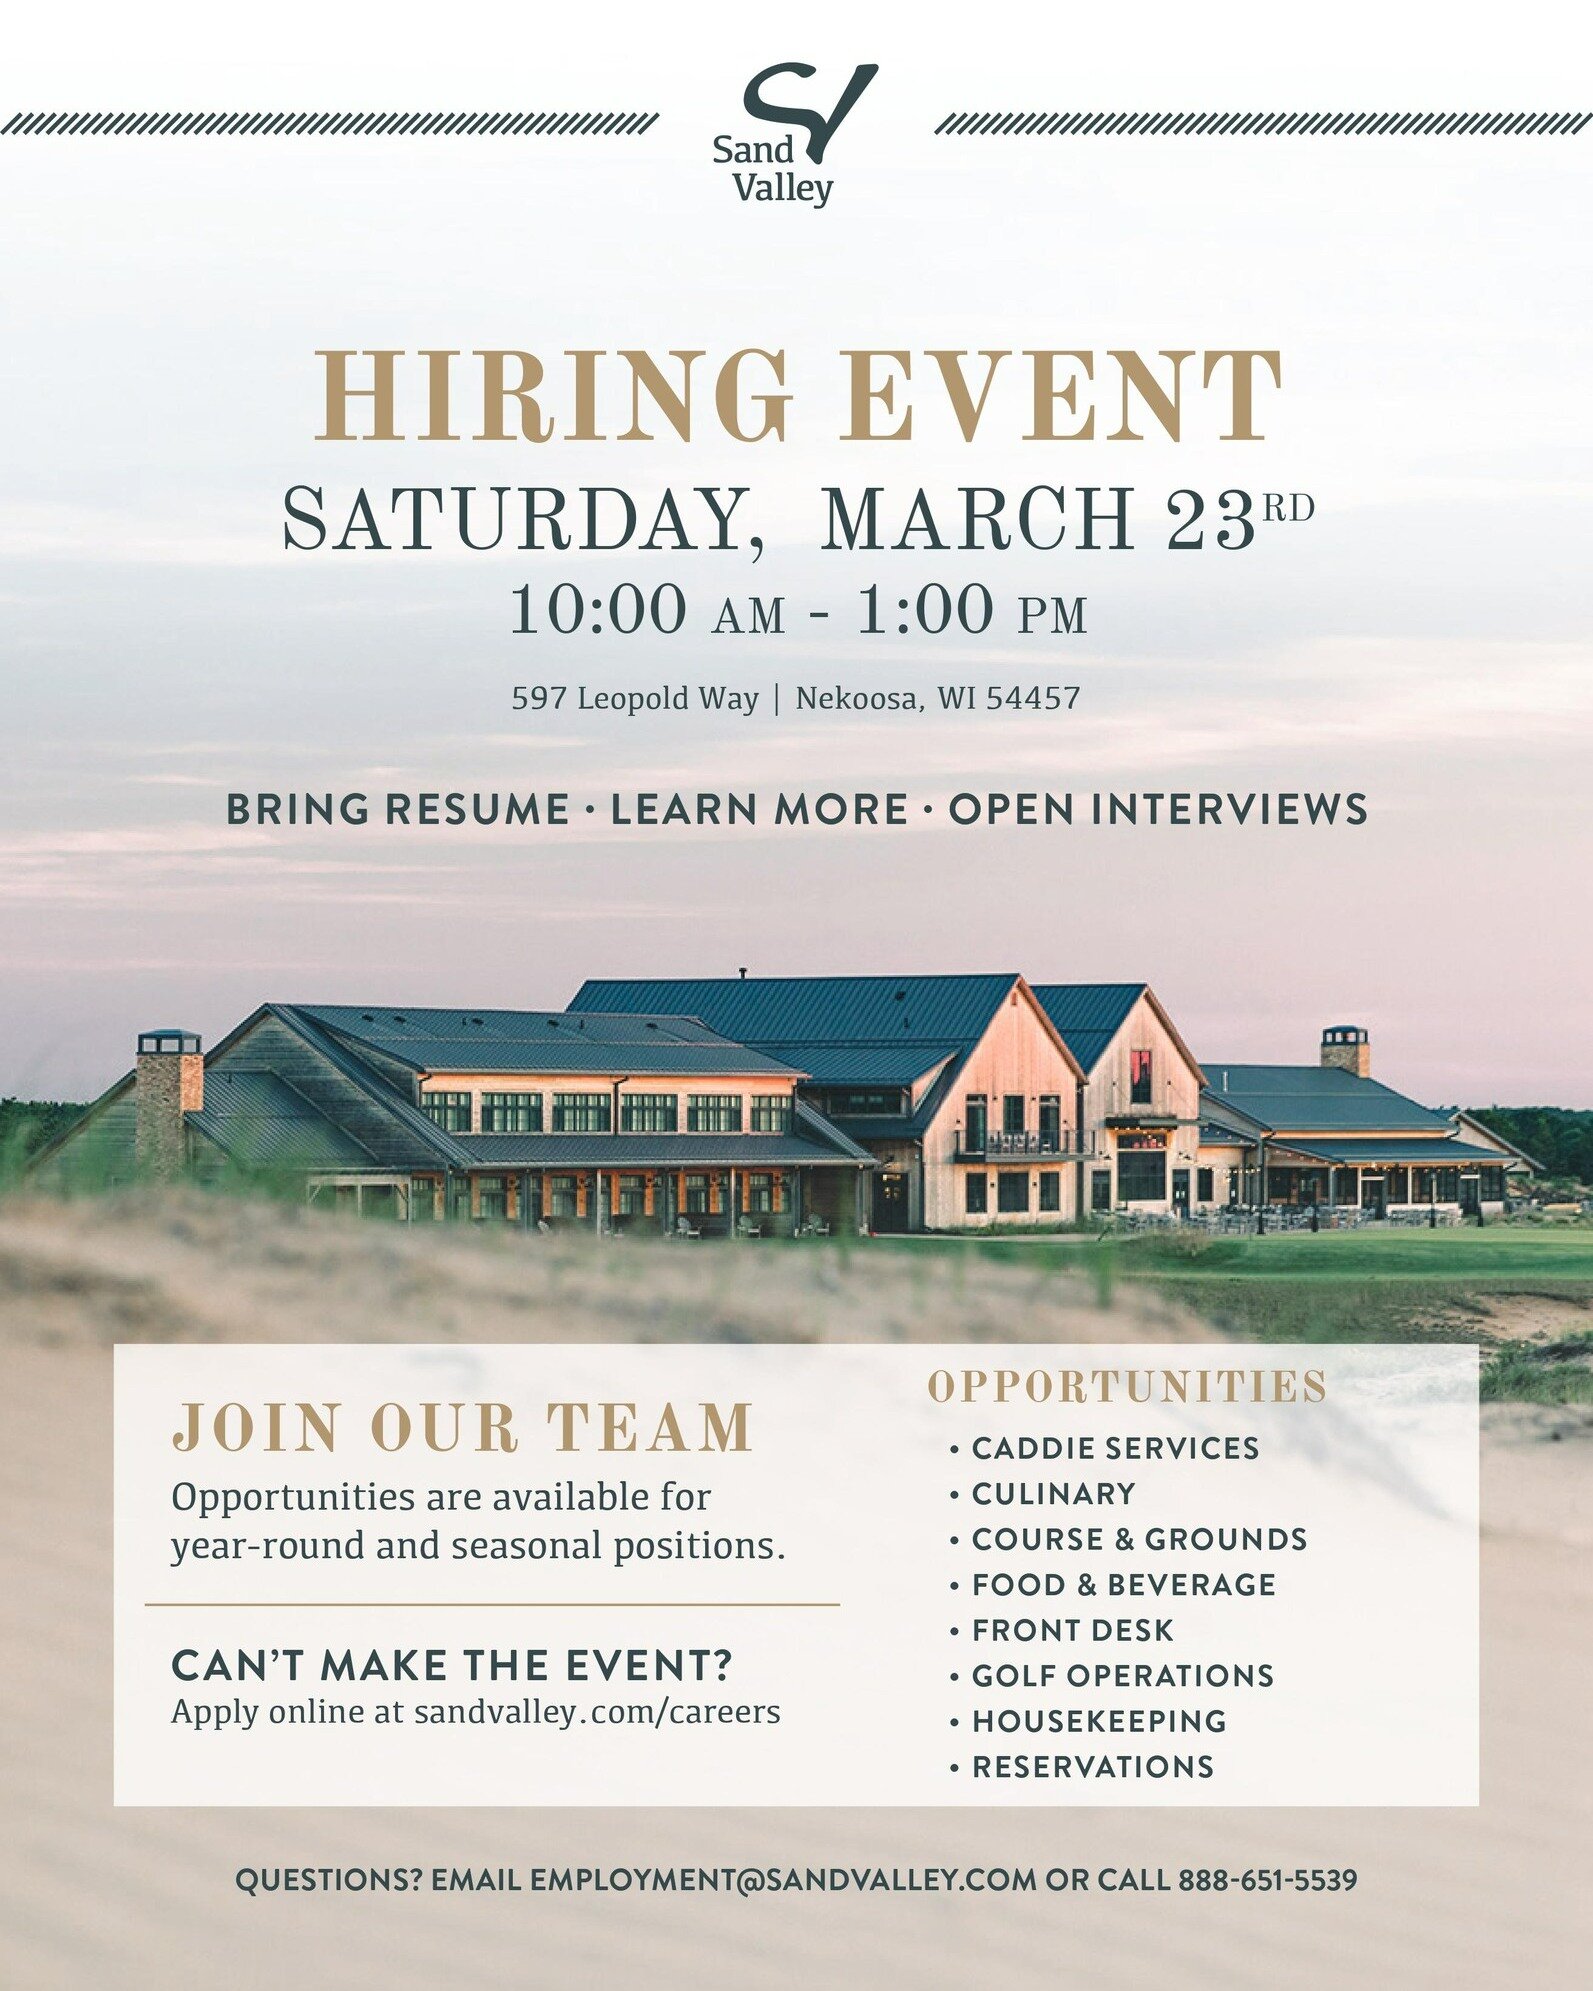 Sand Valley is HIRING!
Bring your resume, learn more about the business, and even stop in for an open interview!
There are opportunities for both seasonal and year-round positions in caddie services, culinary, course/grounds, front desk, housekeeping